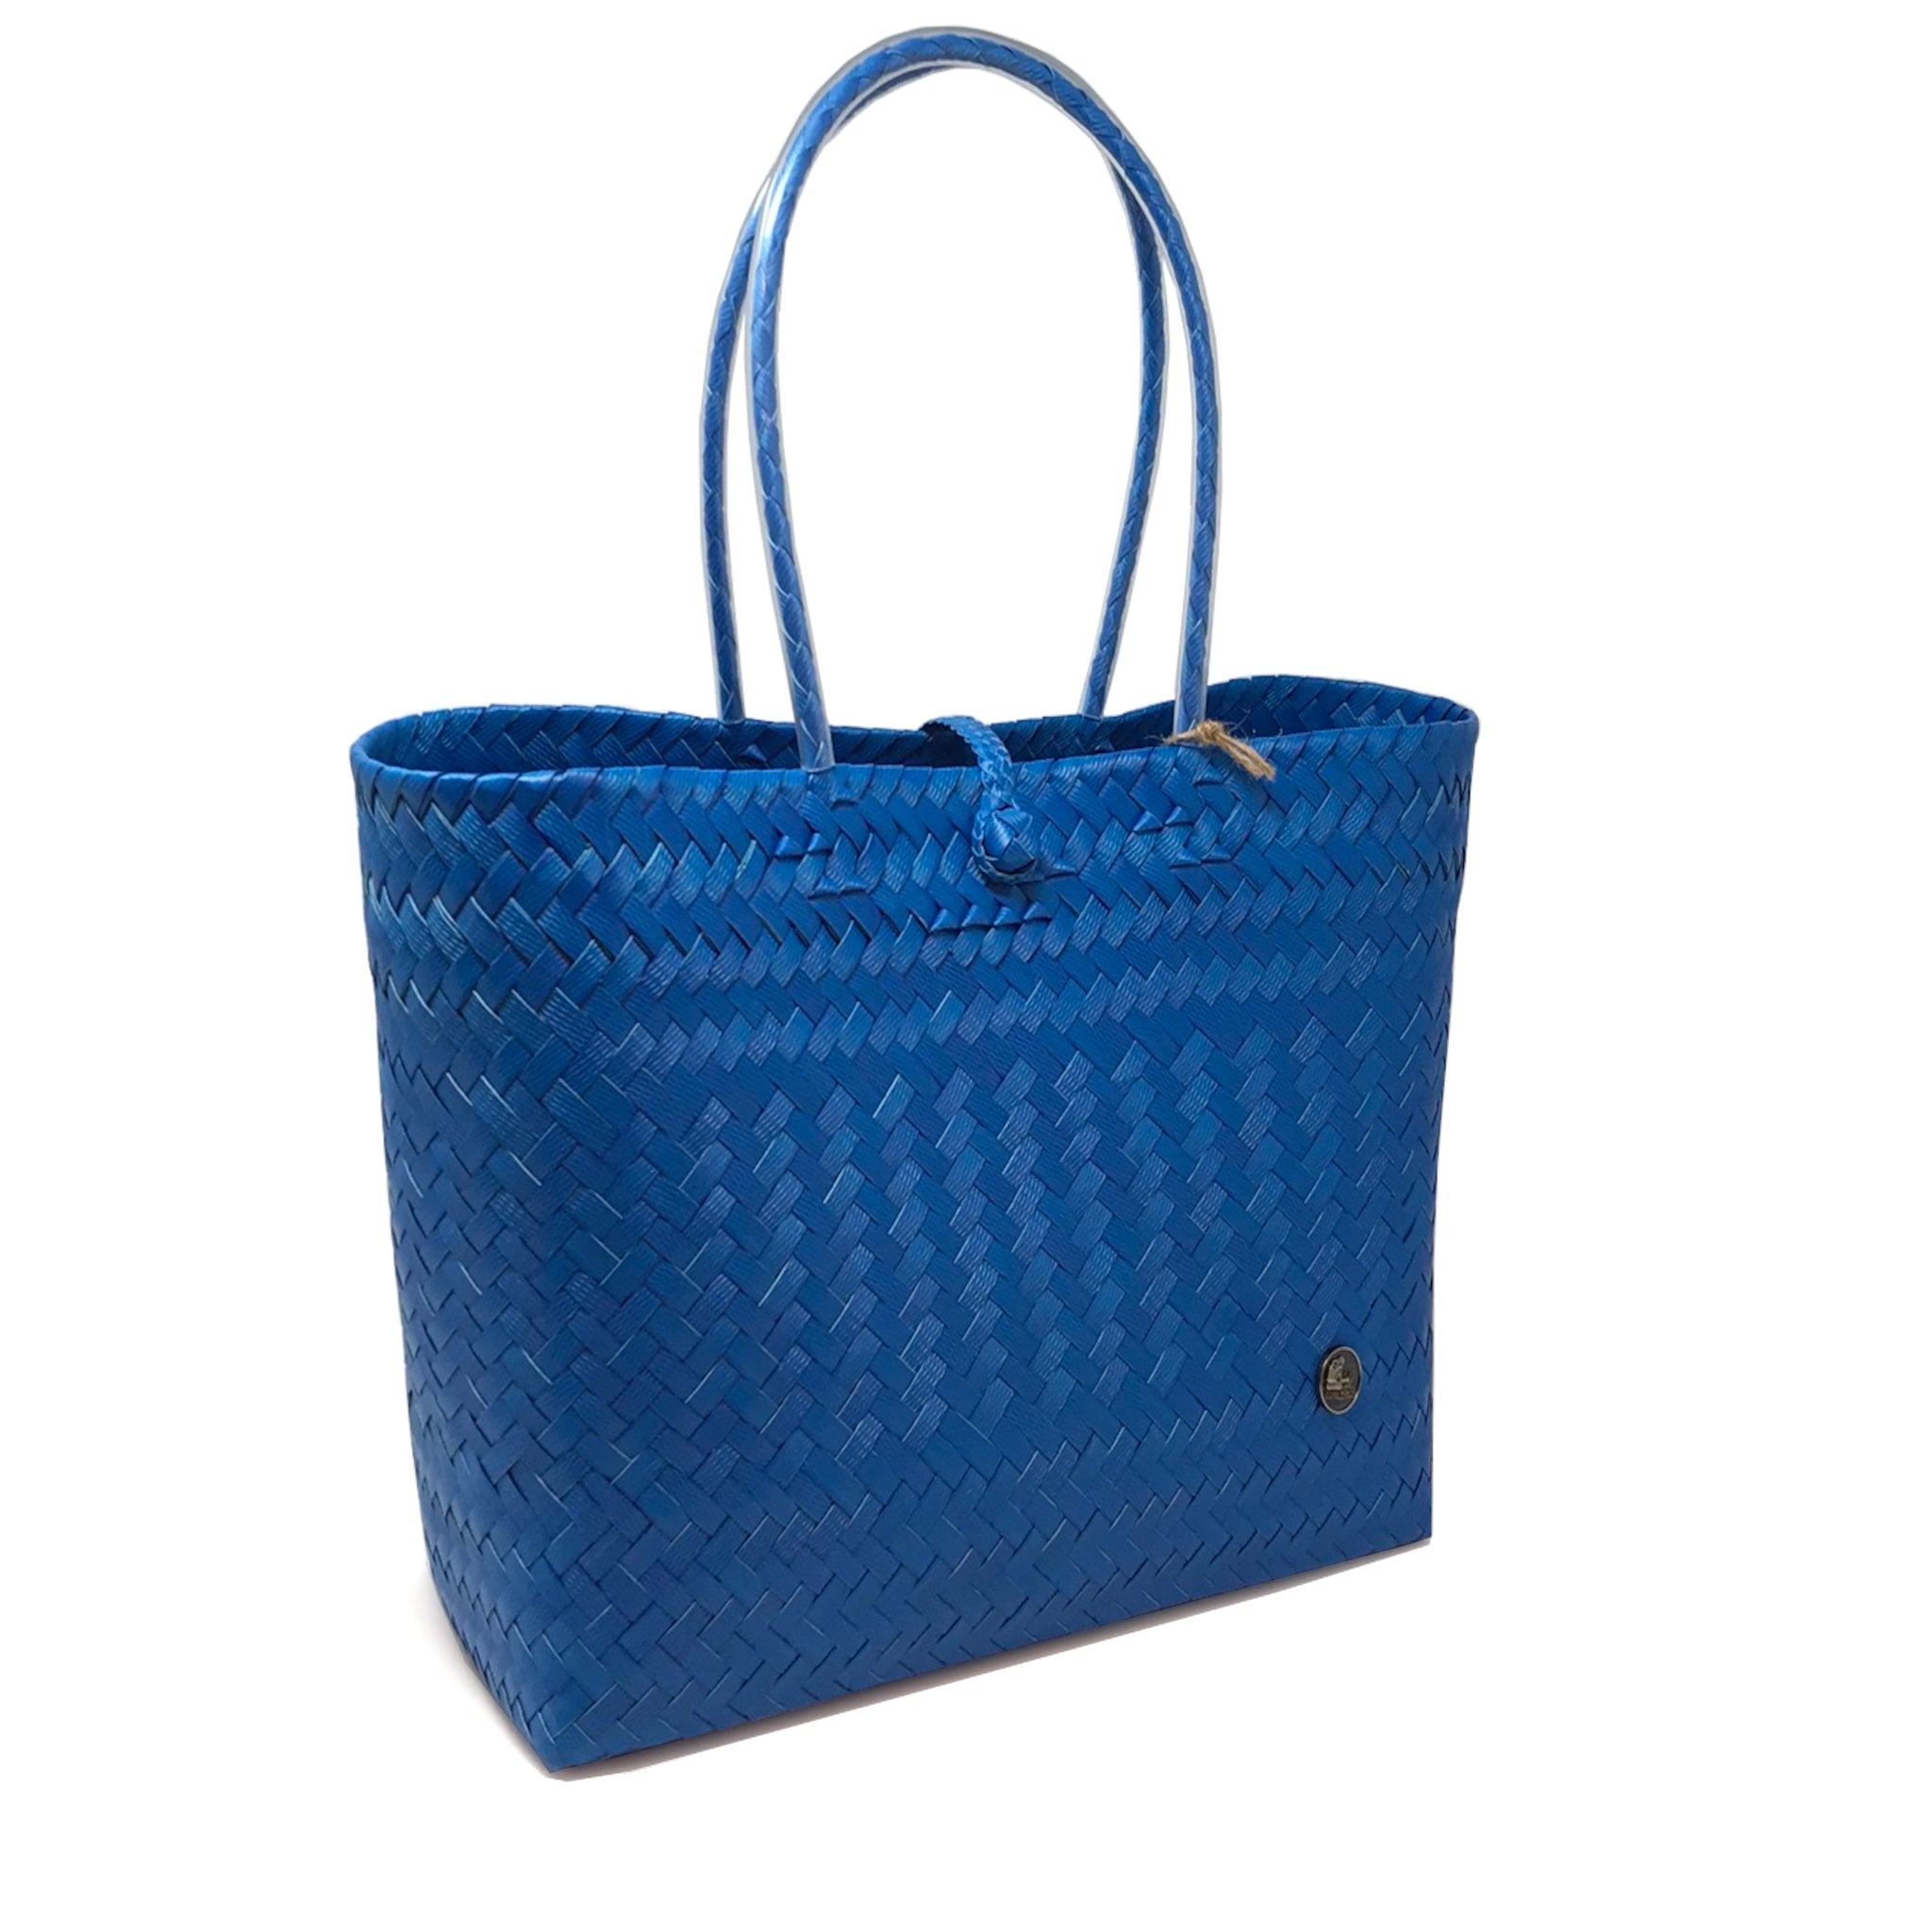 Everyday Tote Bag - Blue